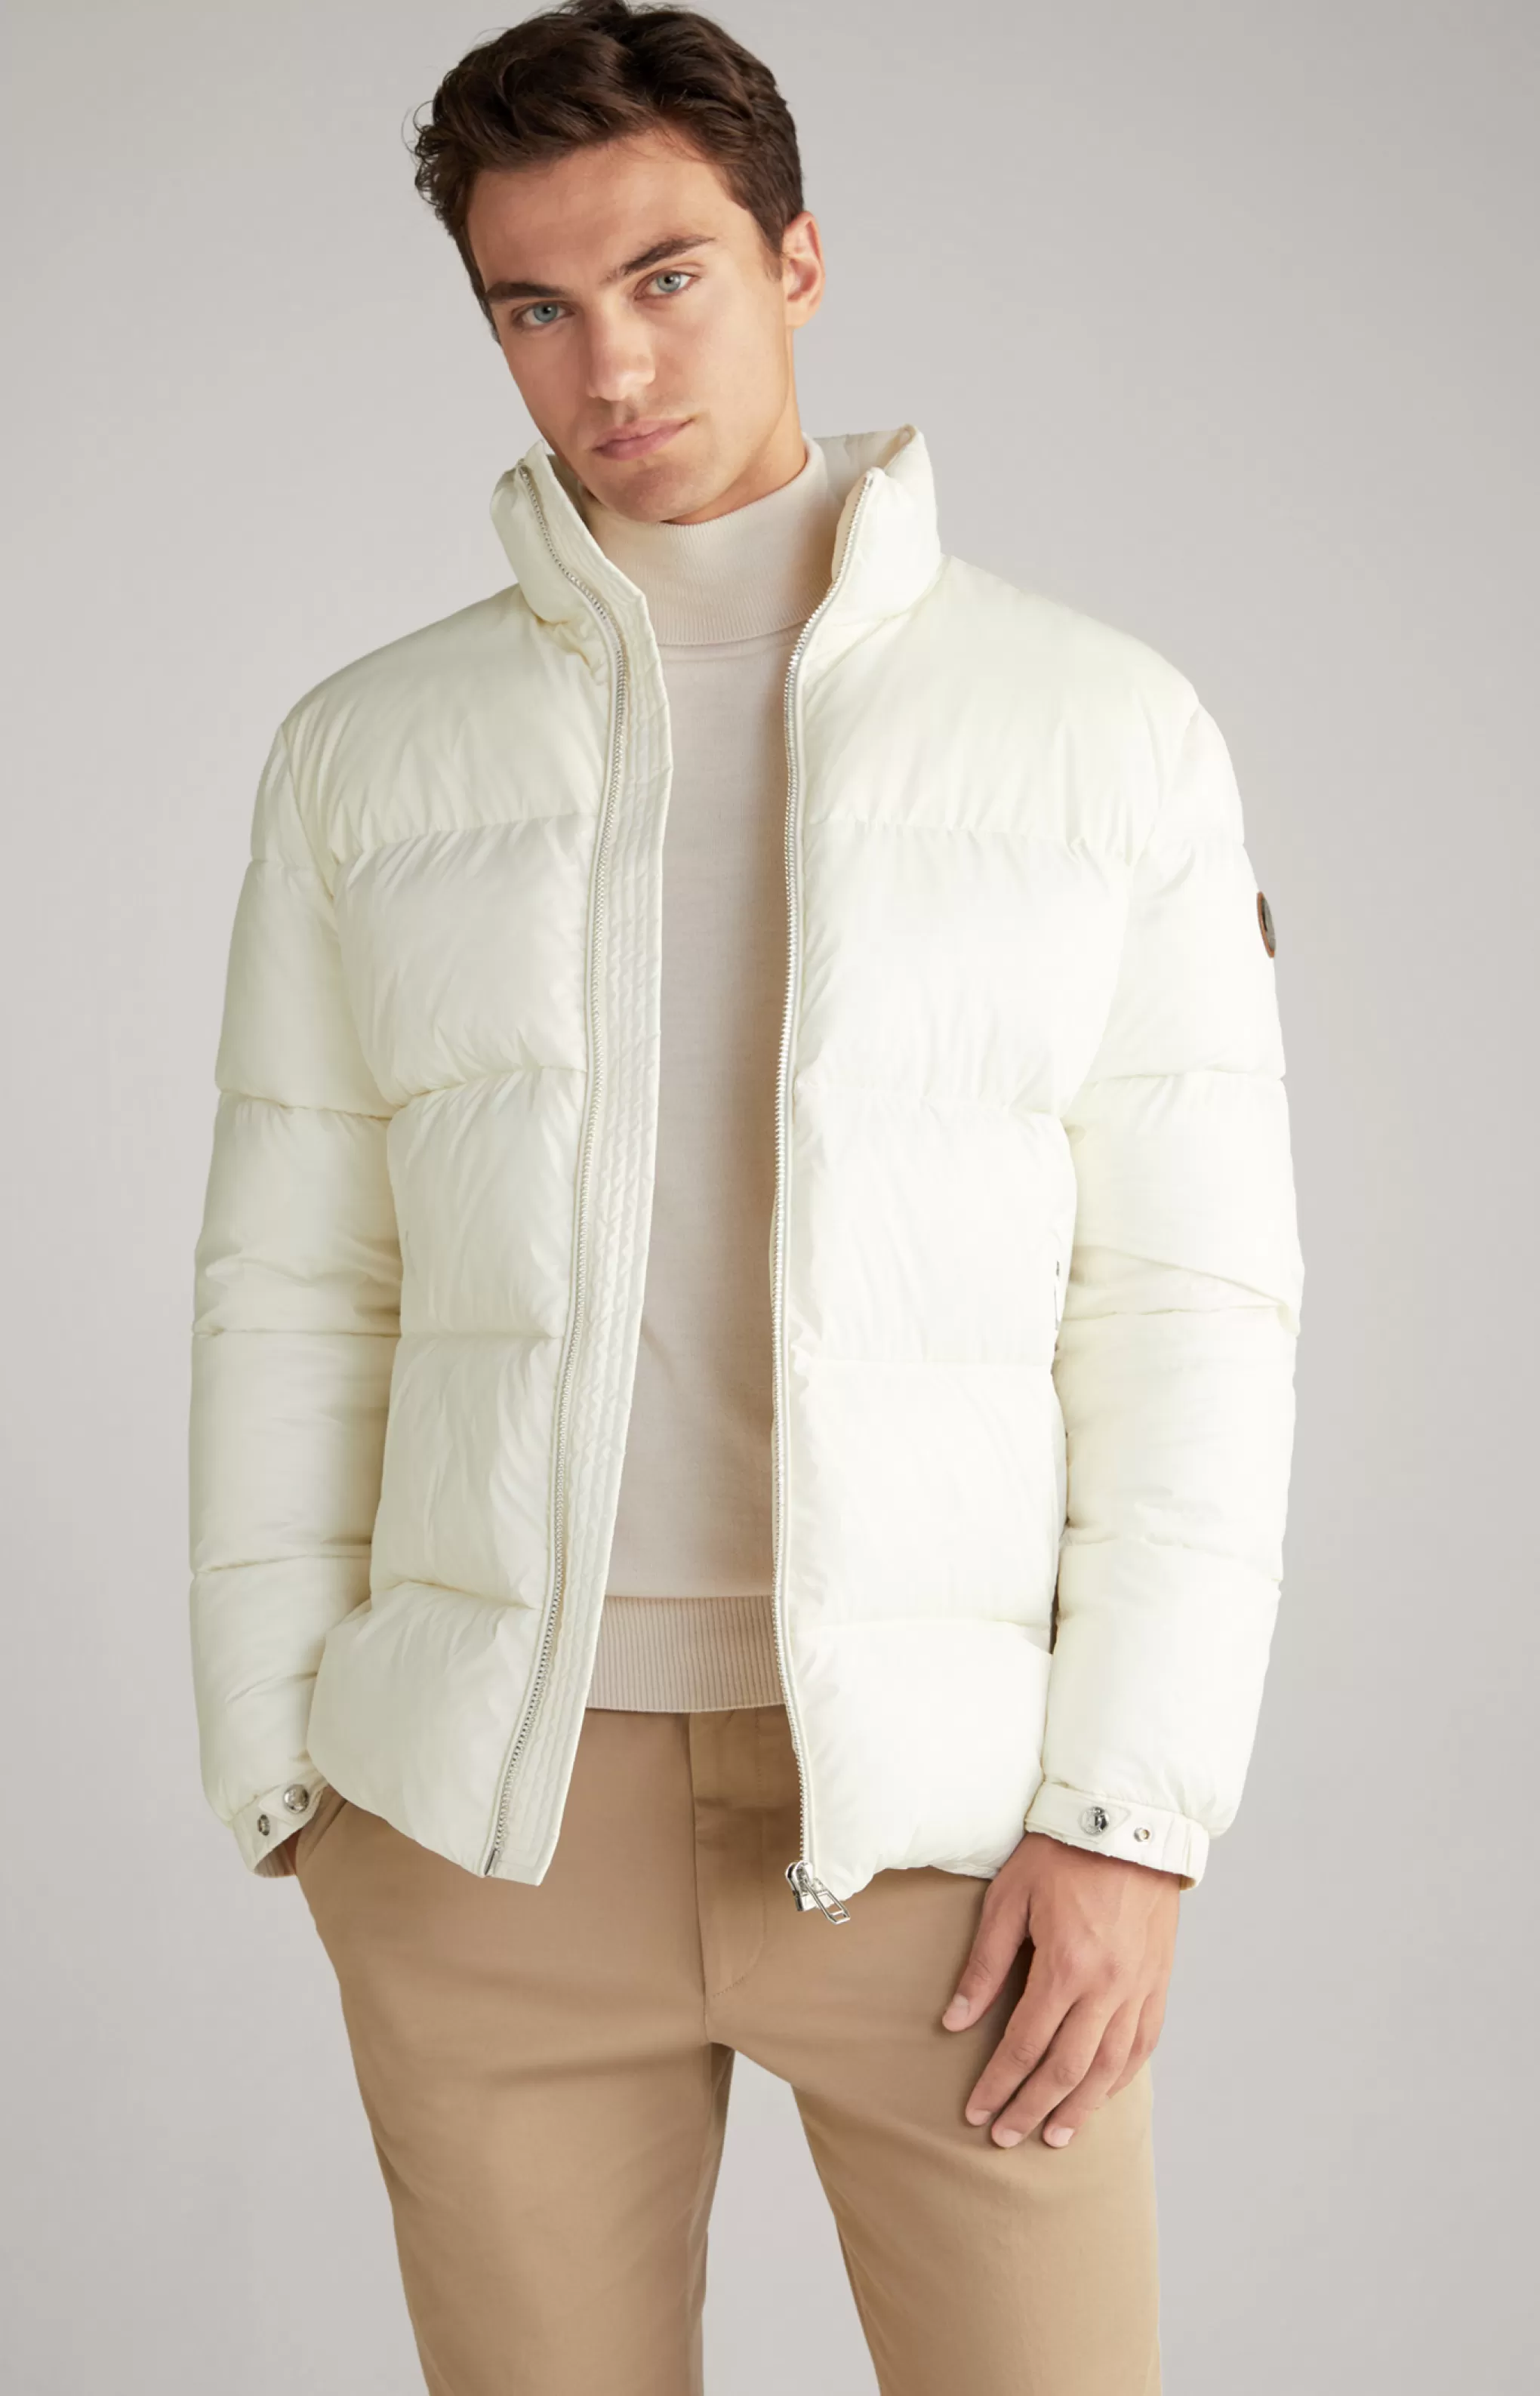 Jackets | Clothing*JOOP Jackets | Clothing Quilted Jacket in